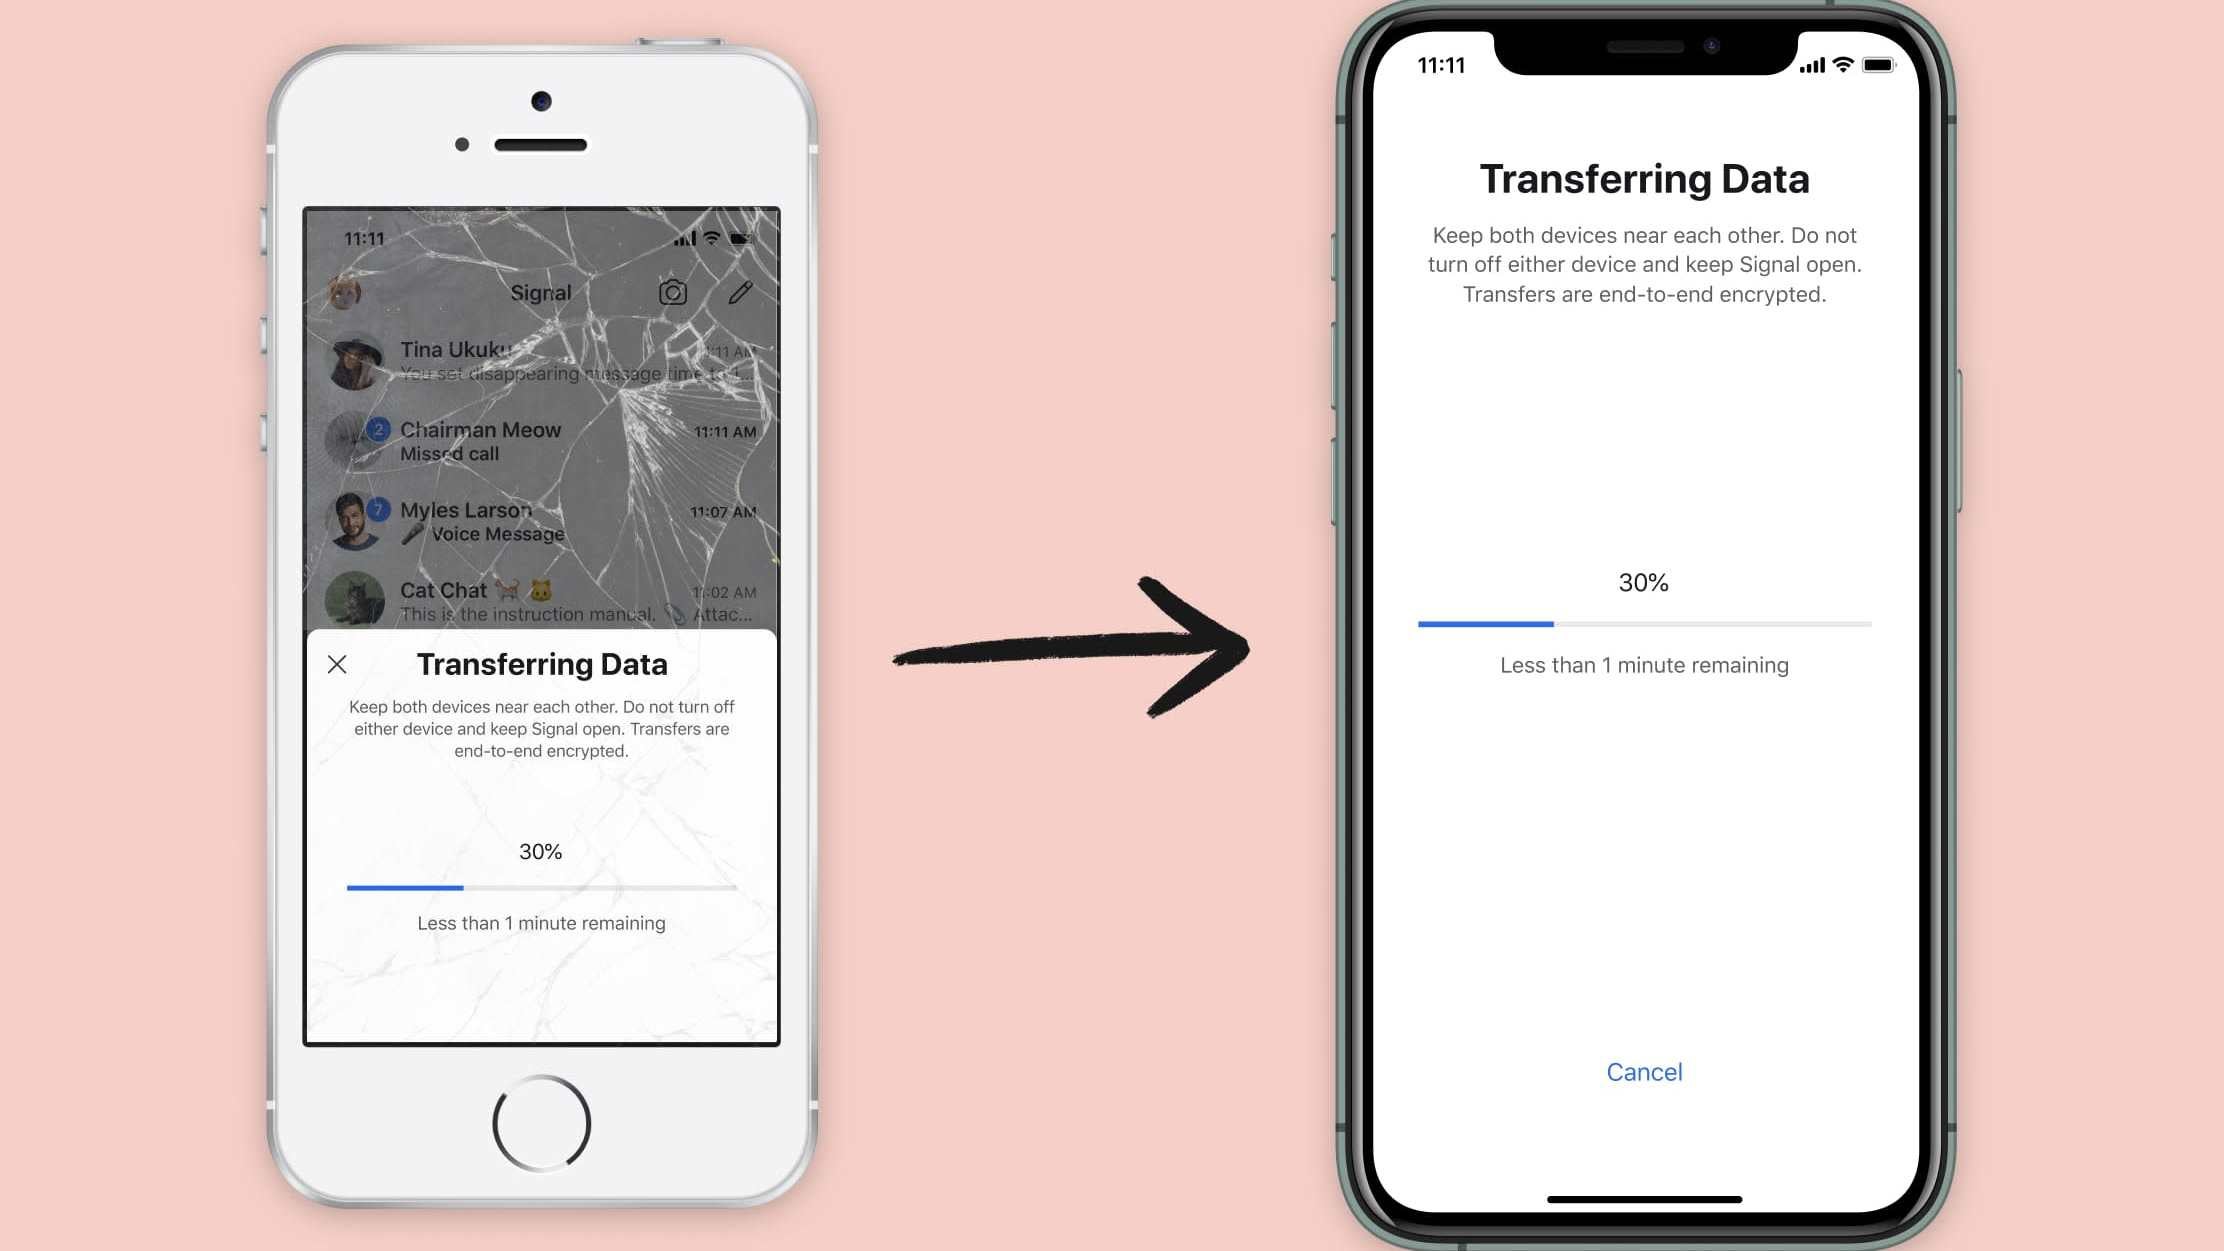 How To Securely Transfer Your Signal Account To A New iPhone